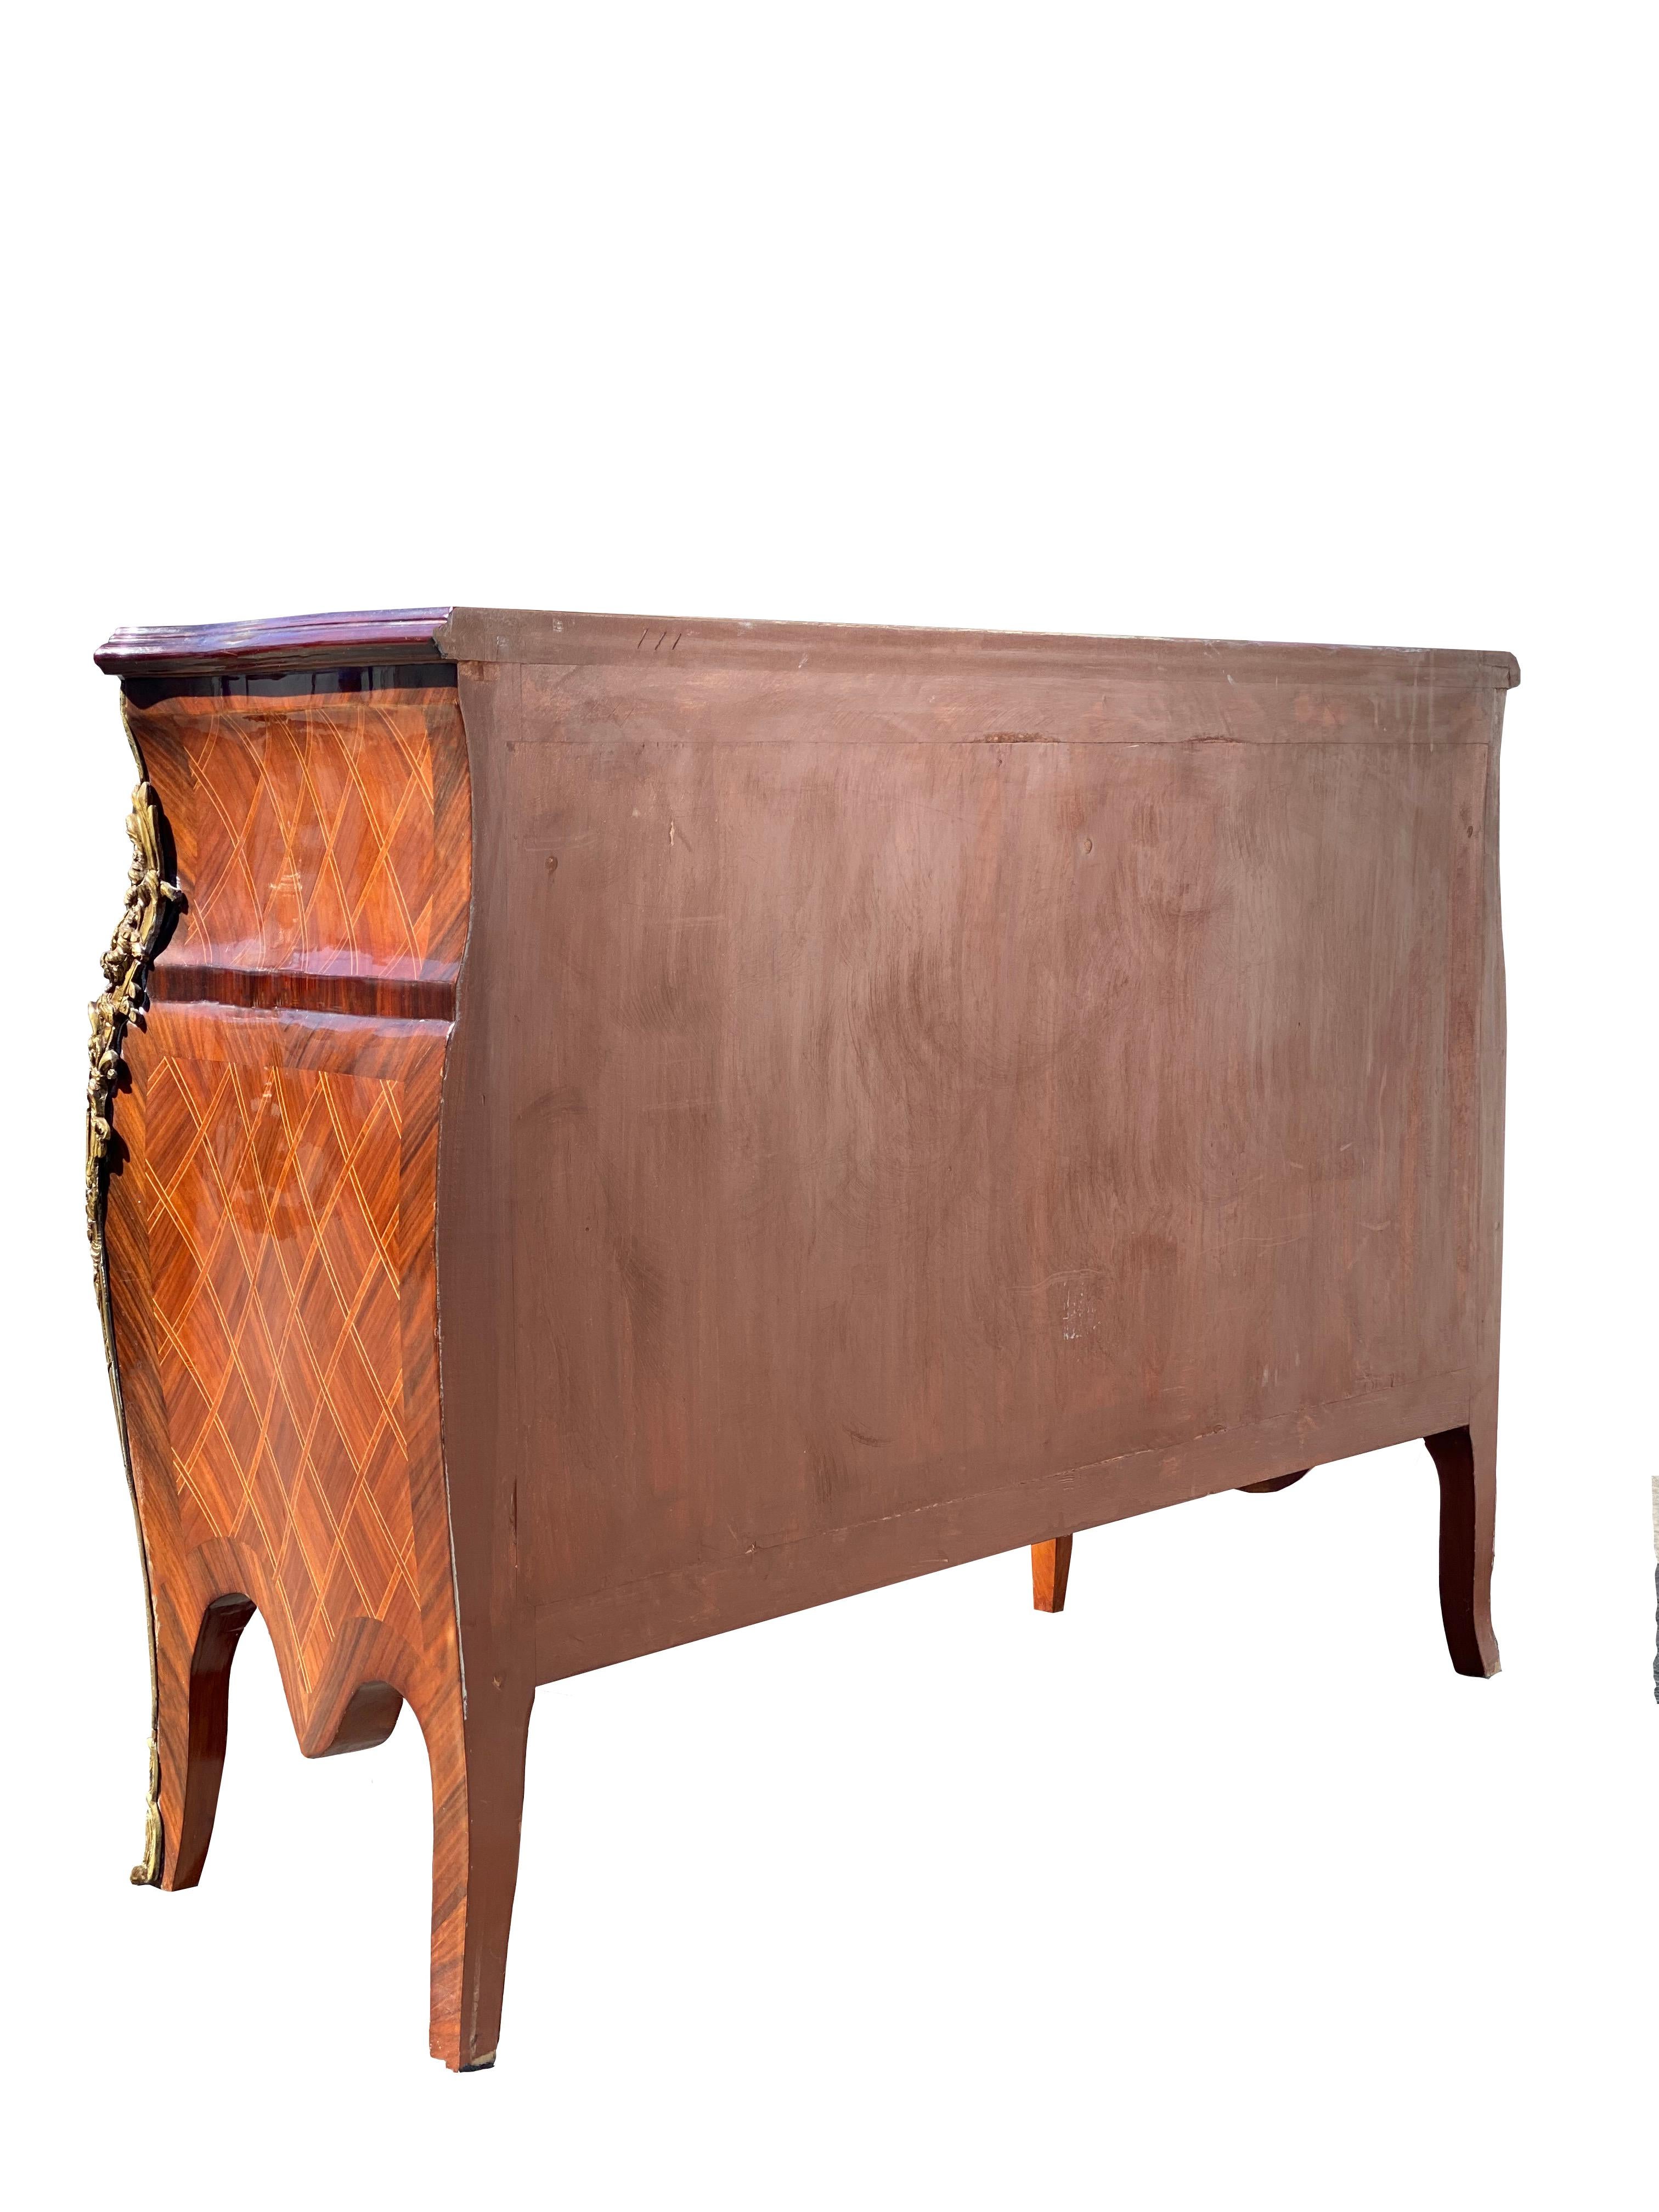 French Louis Antique Inlay and Gilt Bombe Commode Chest In Good Condition For Sale In Beverly Hills, CA